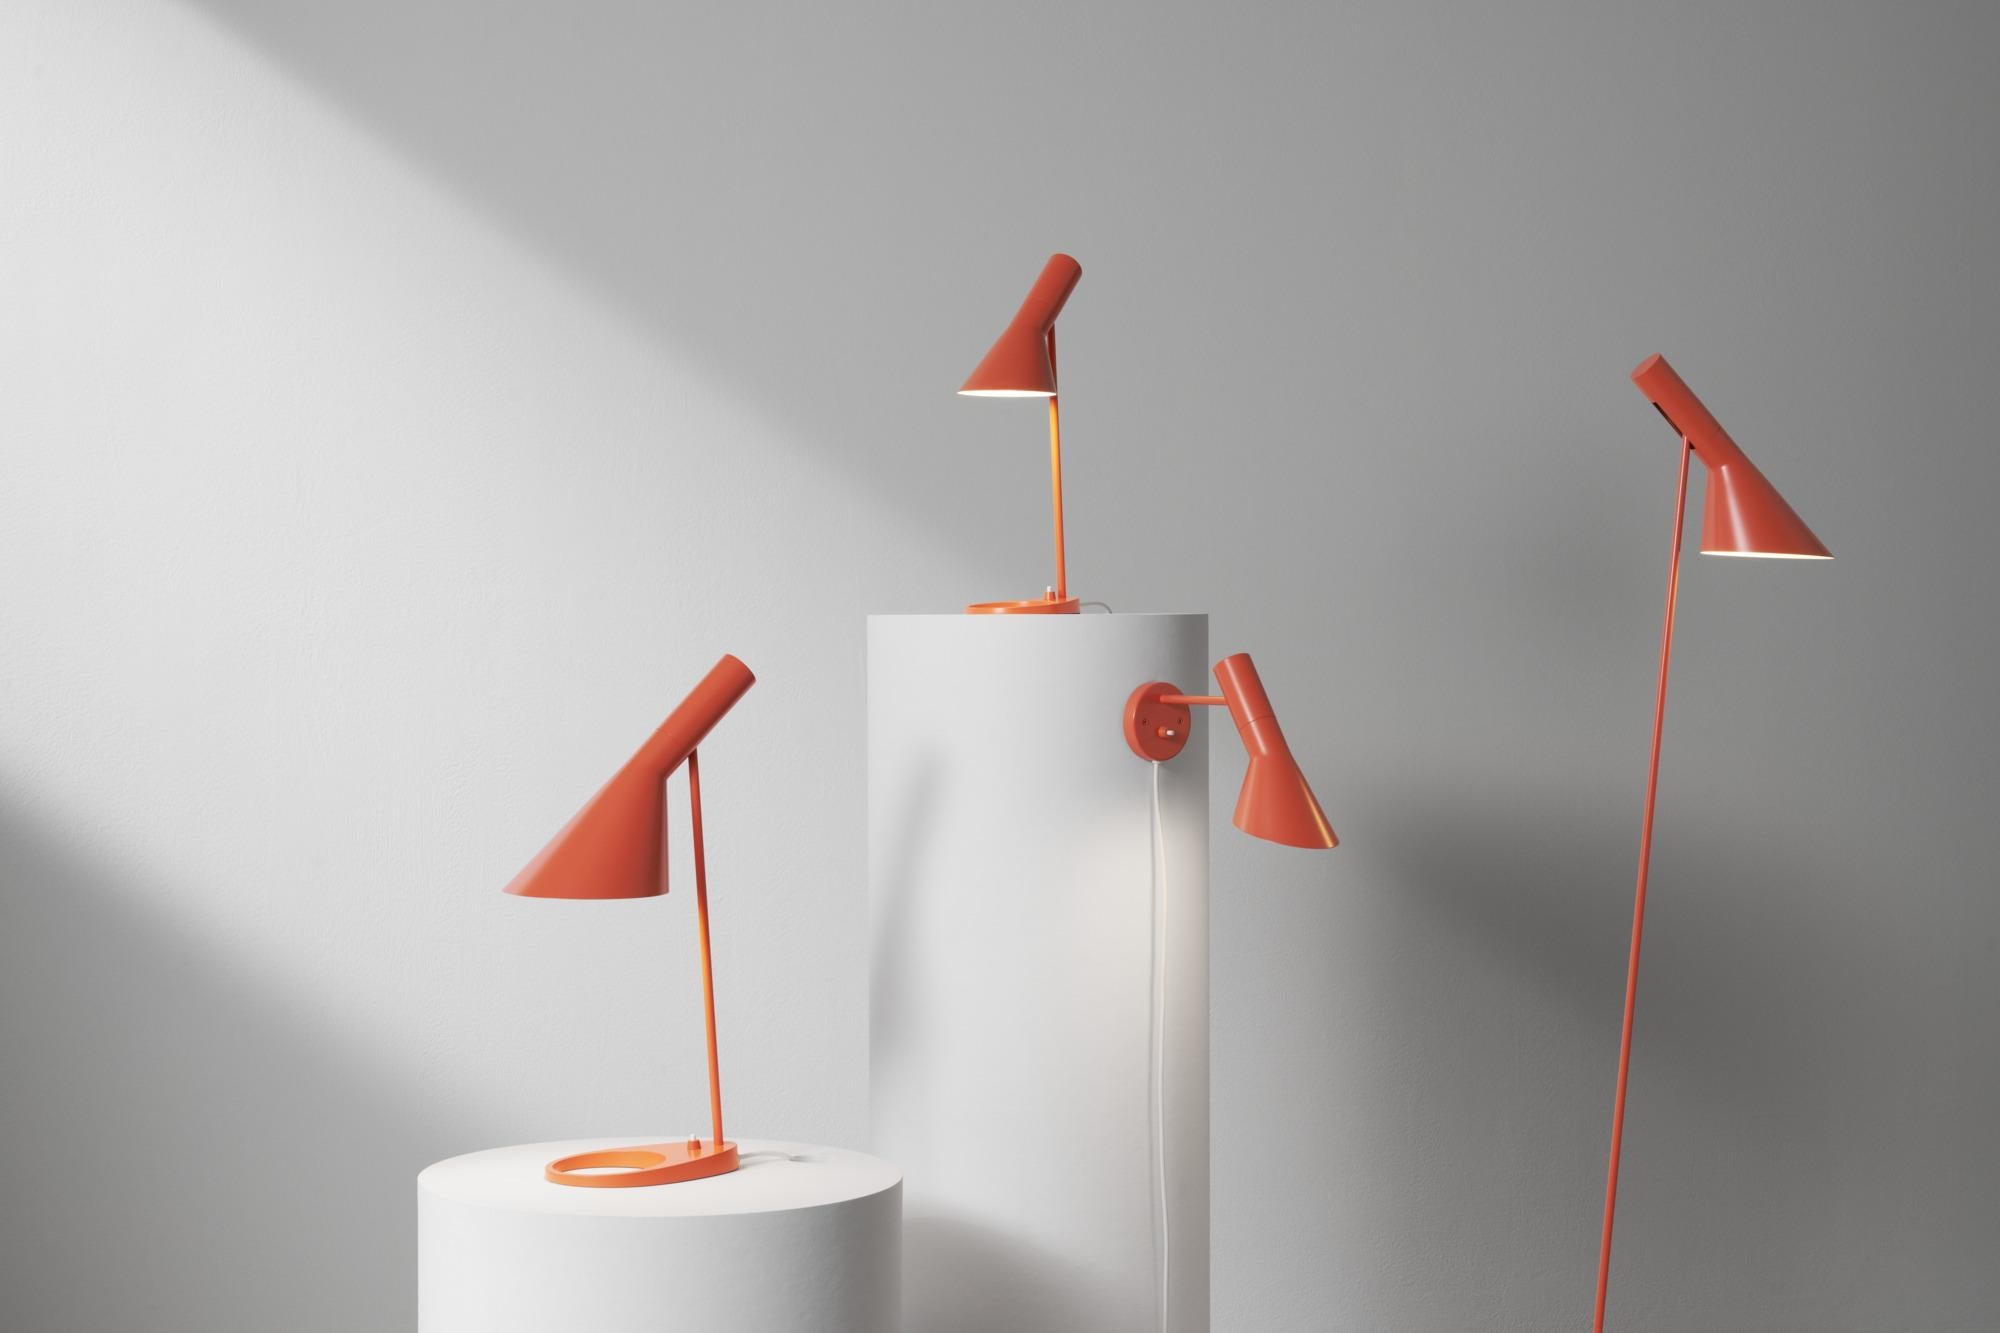 Arne Jacobsen AJ Floor Lamp in Electric Orange for Louis Poulsen.

The AJ series was part of the lighting collection renowned Danish designer Arne Jacobsen created for the original SAS Royal Hotel in 1957. Today, his furniture and lighting designs